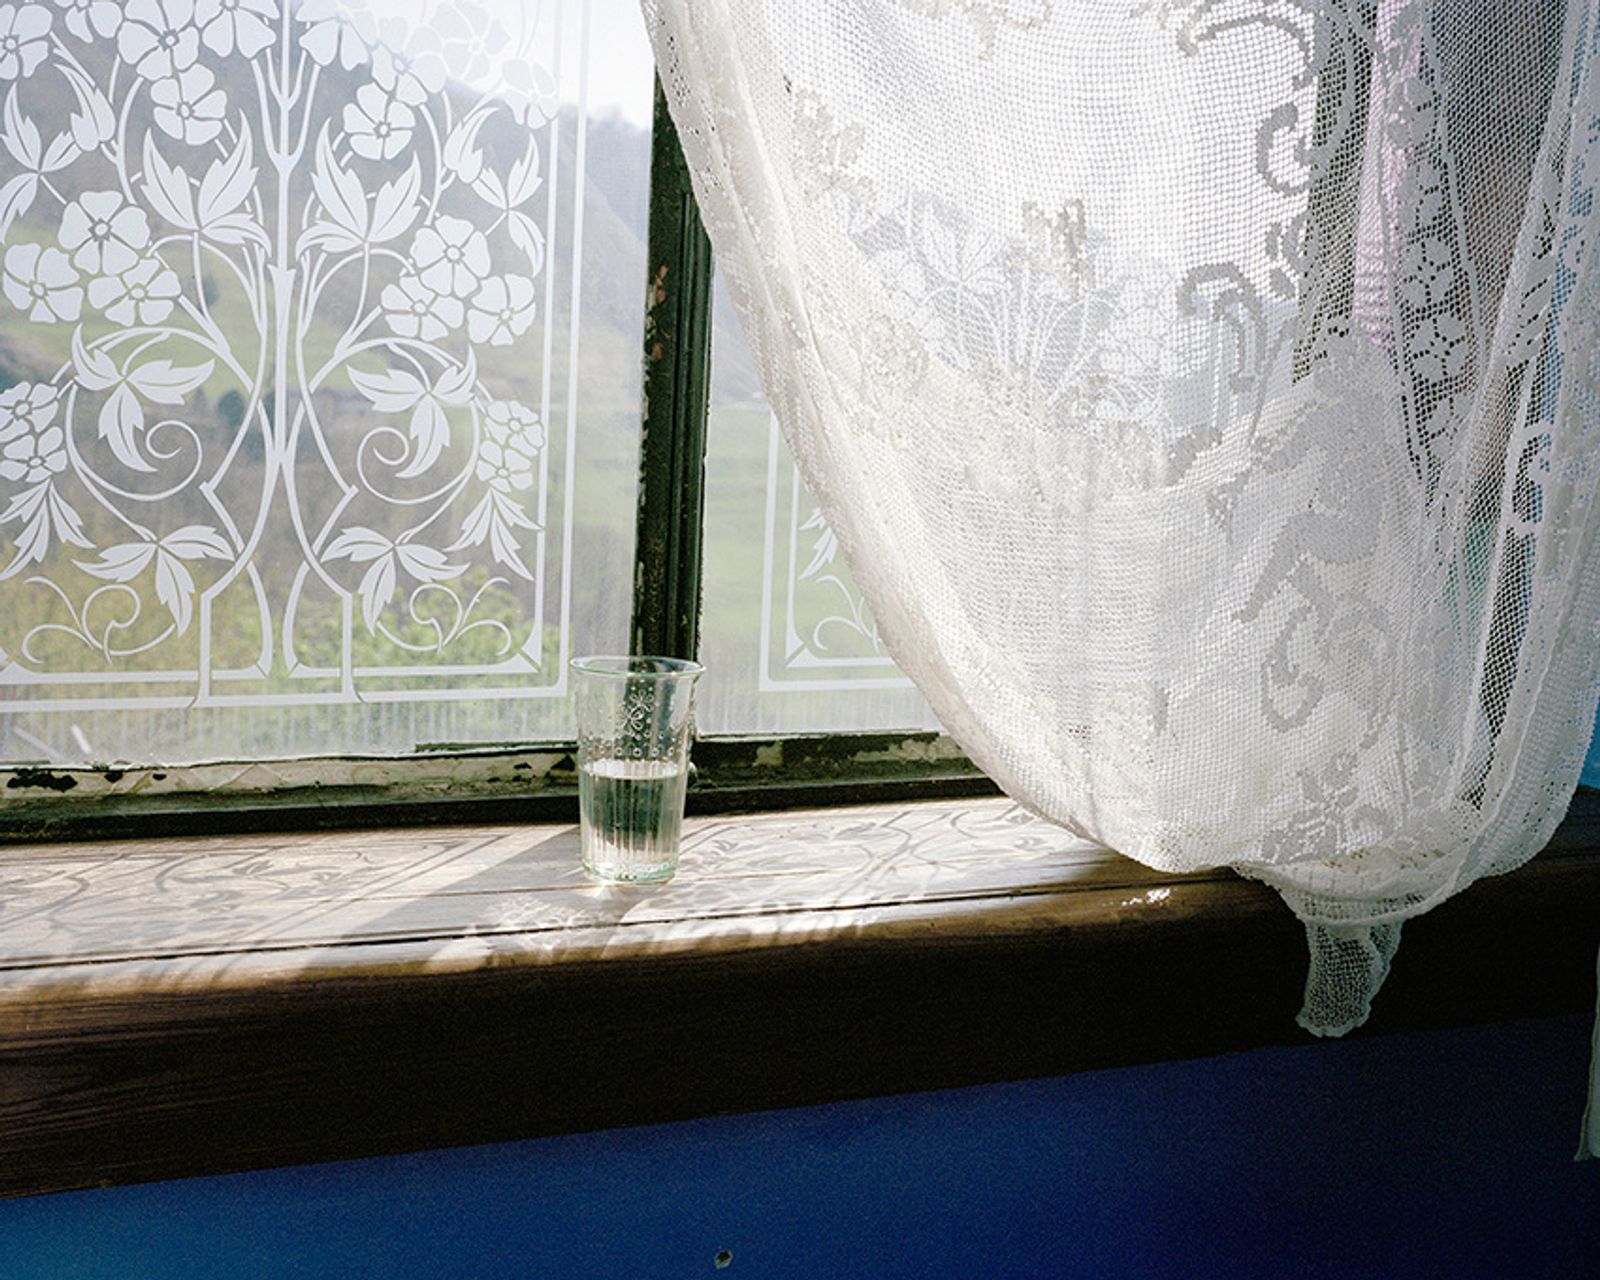 © Arunà Canevascini - Image from the villa argentina photography project